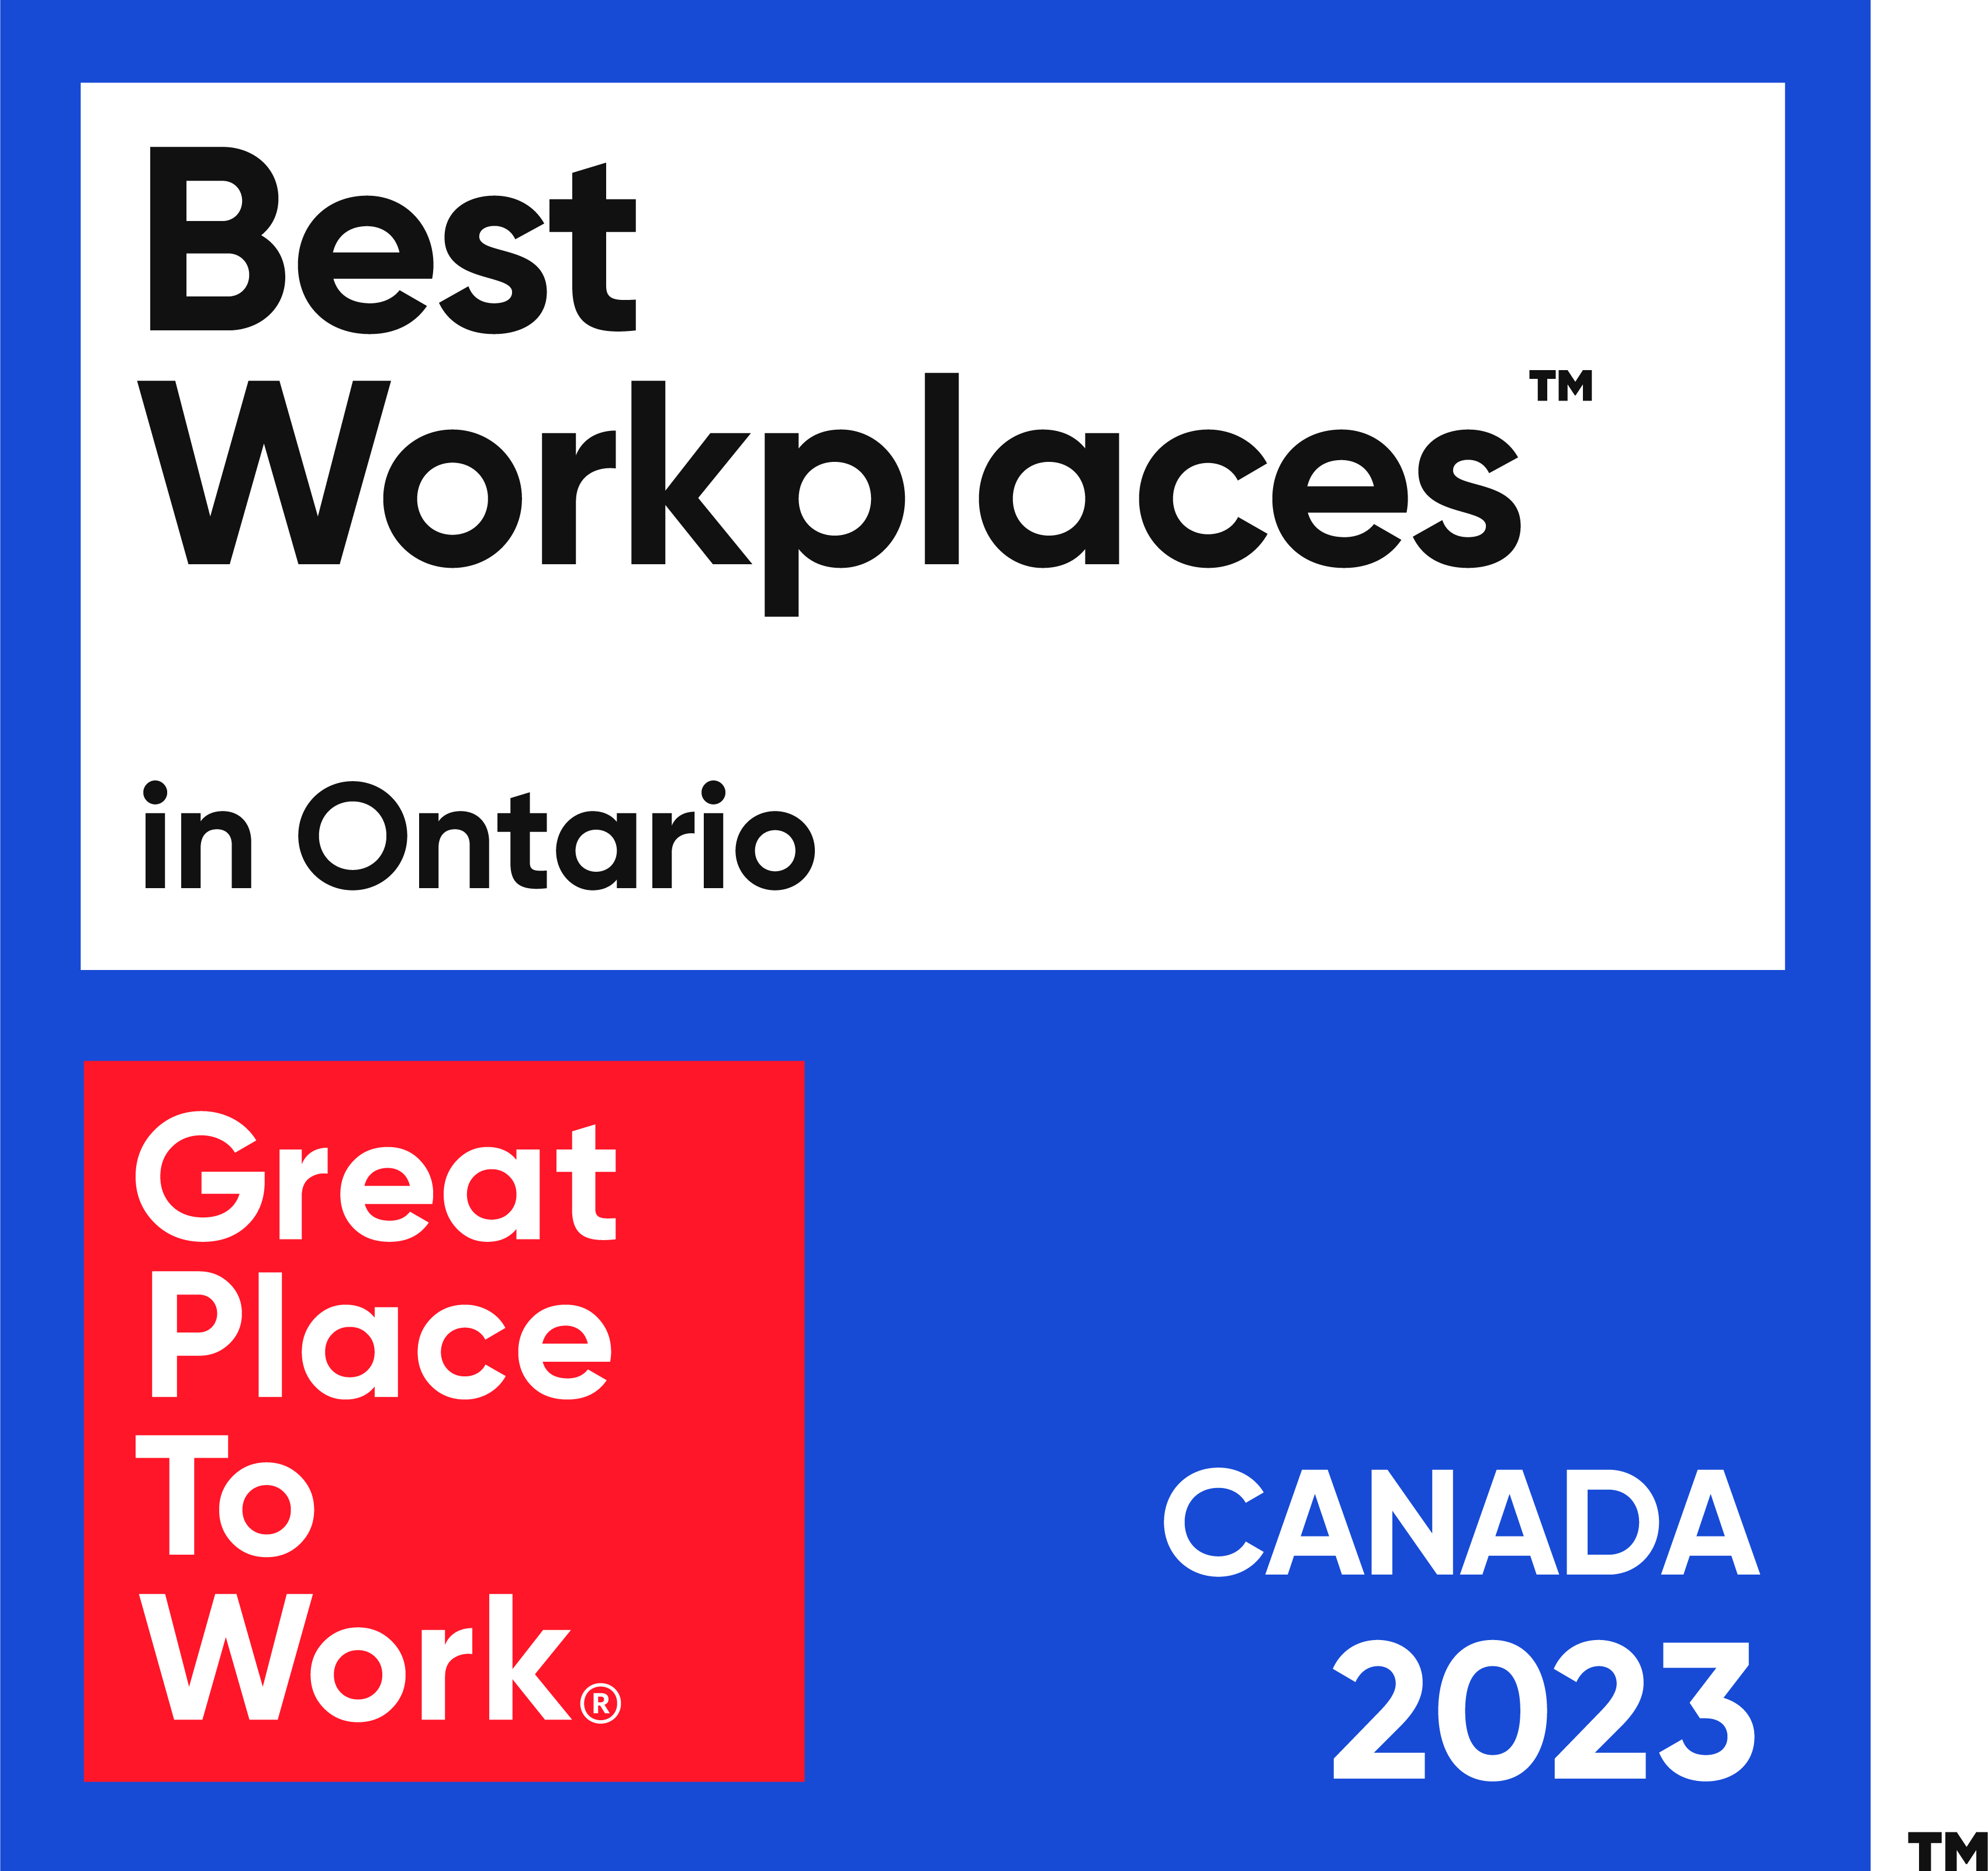 Best Workplaces in Ontario - Great Place to Work - Canada 2023